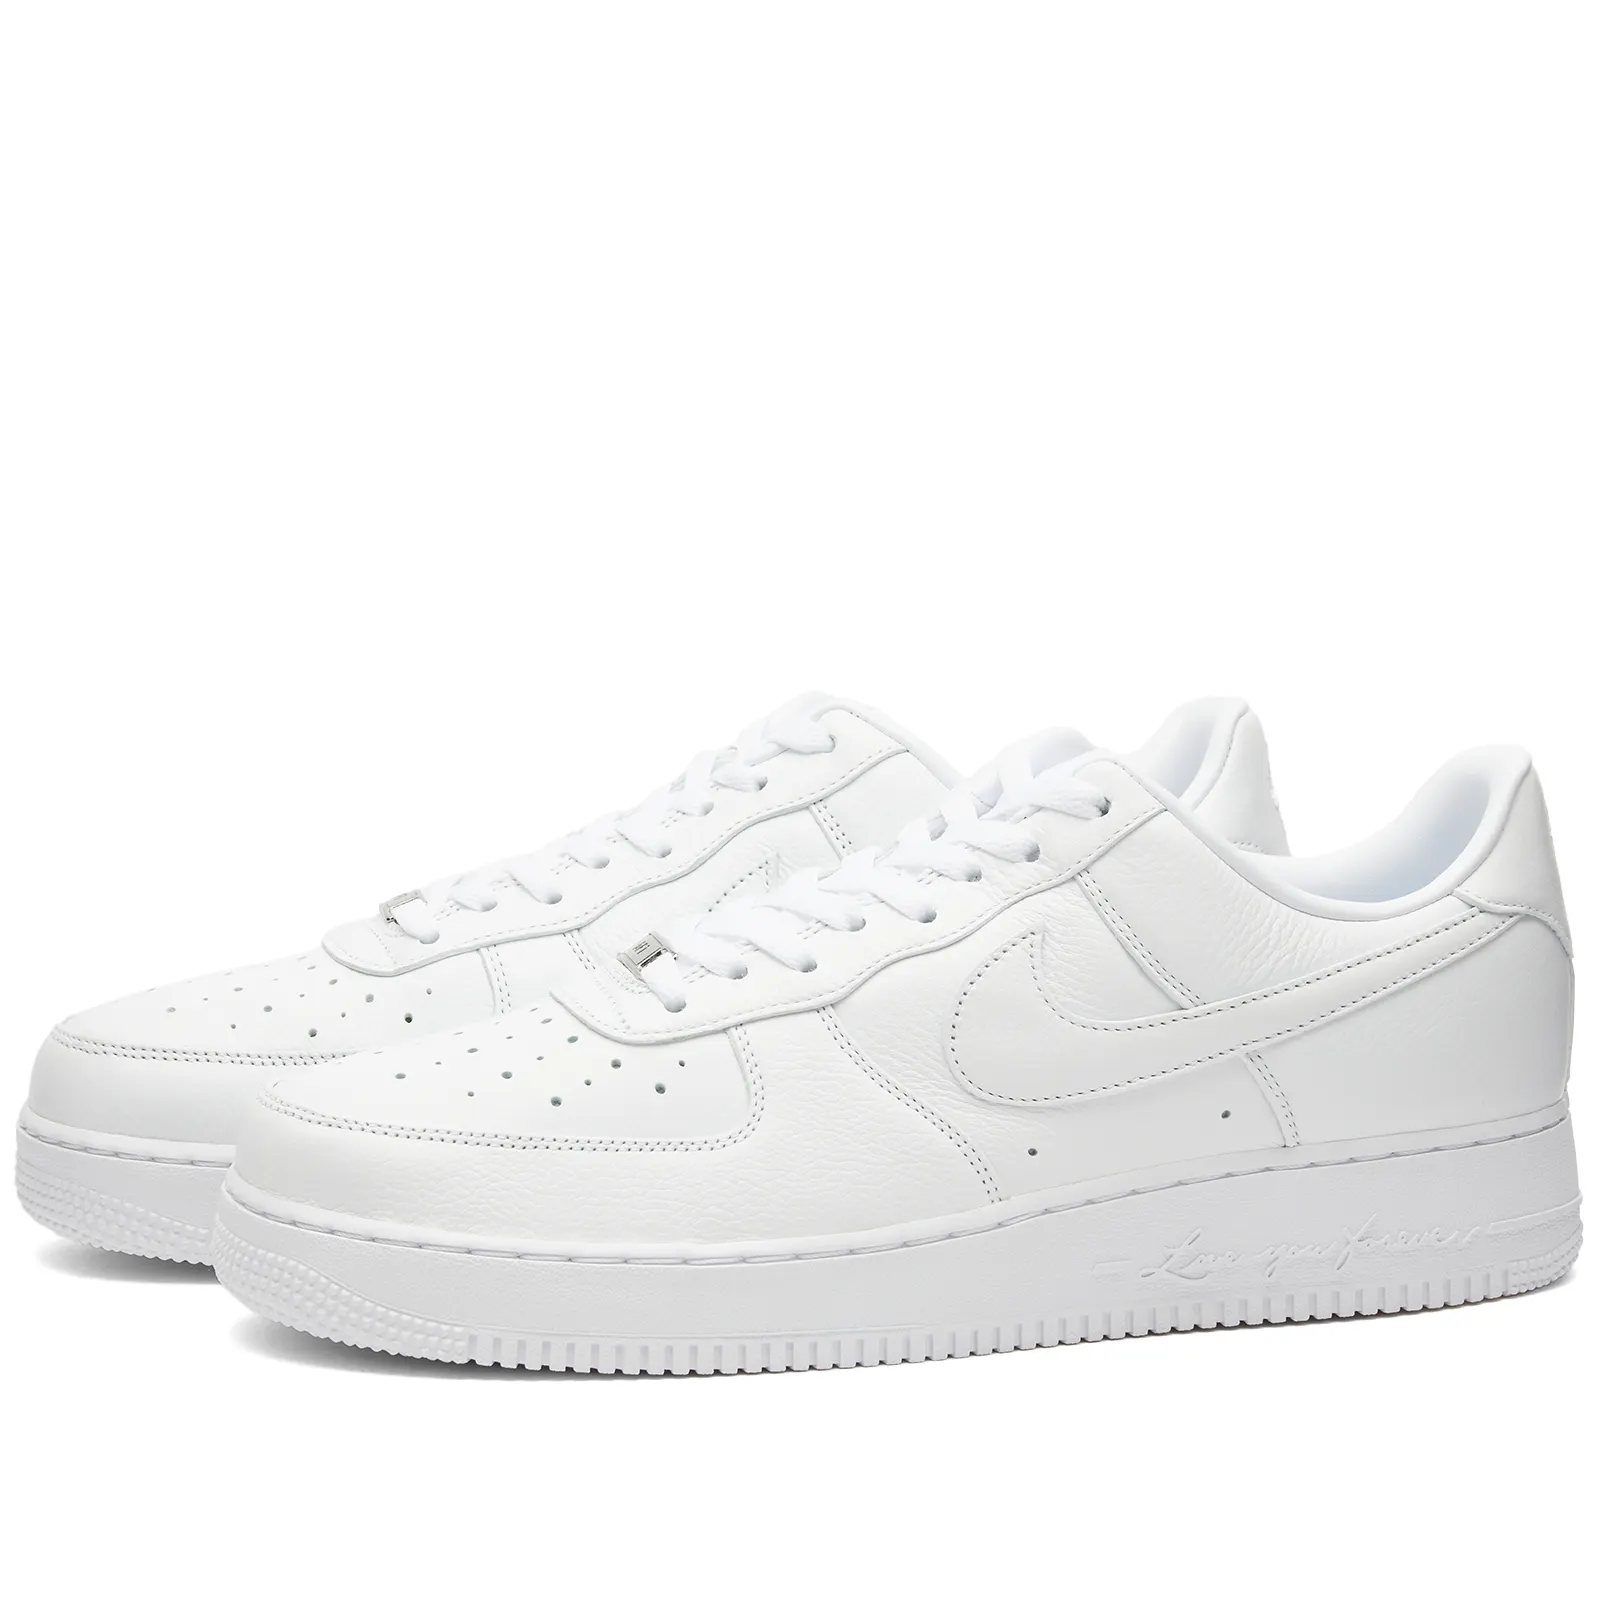 Nike X NOCTA Air Force 1 Low SP Discounts and Cashback